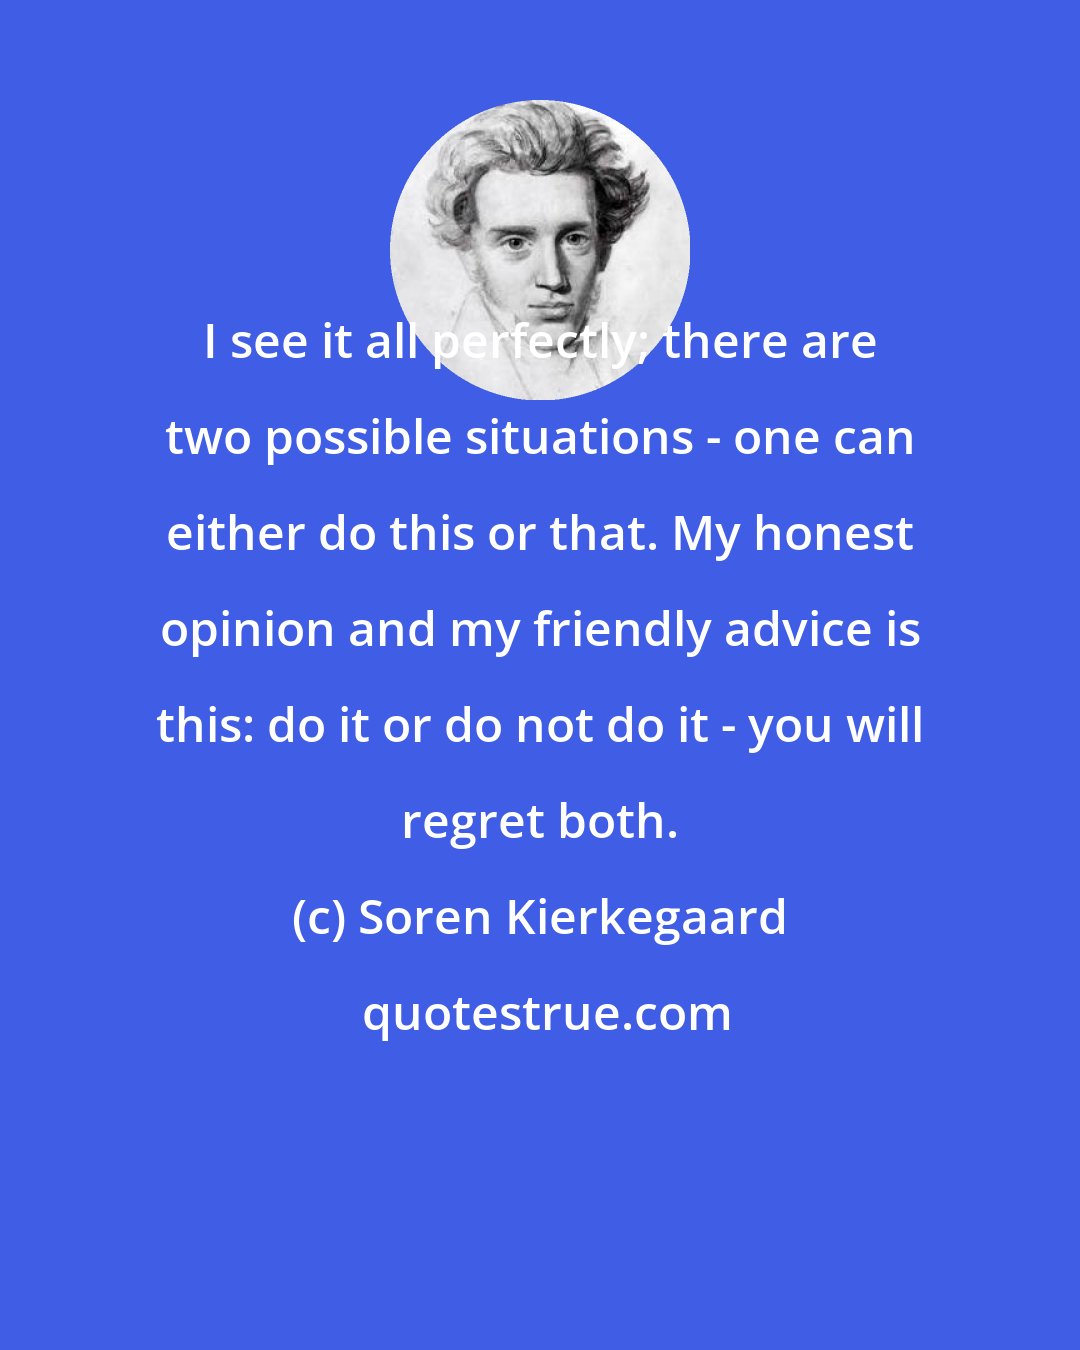 Soren Kierkegaard: I see it all perfectly; there are two possible situations - one can either do this or that. My honest opinion and my friendly advice is this: do it or do not do it - you will regret both.